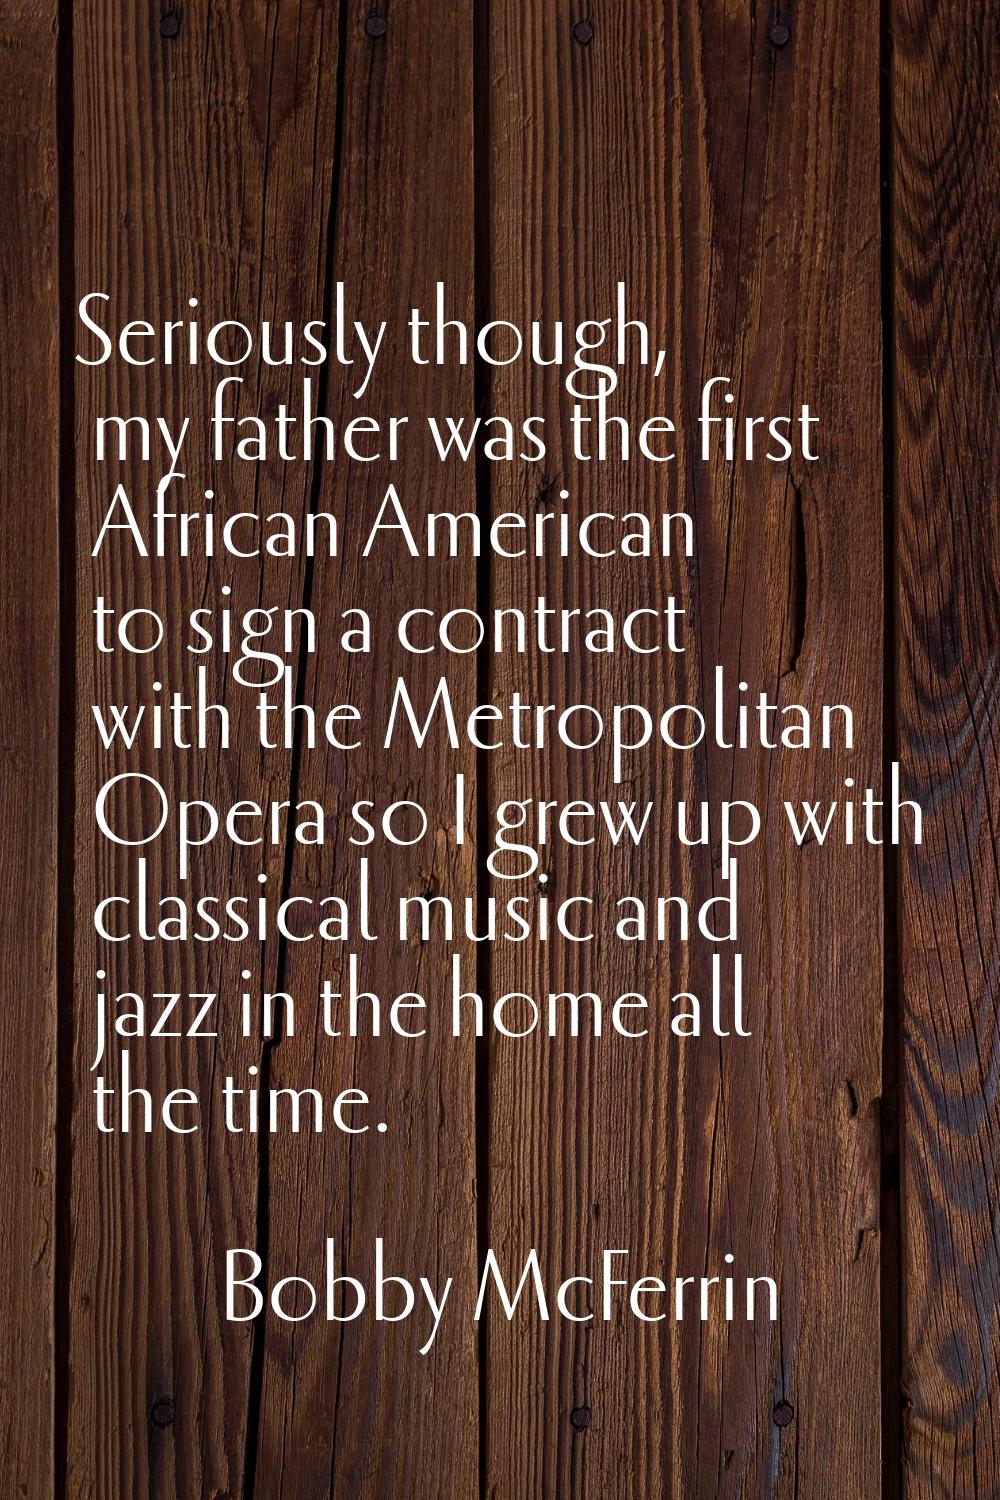 Seriously though, my father was the first African American to sign a contract with the Metropolitan